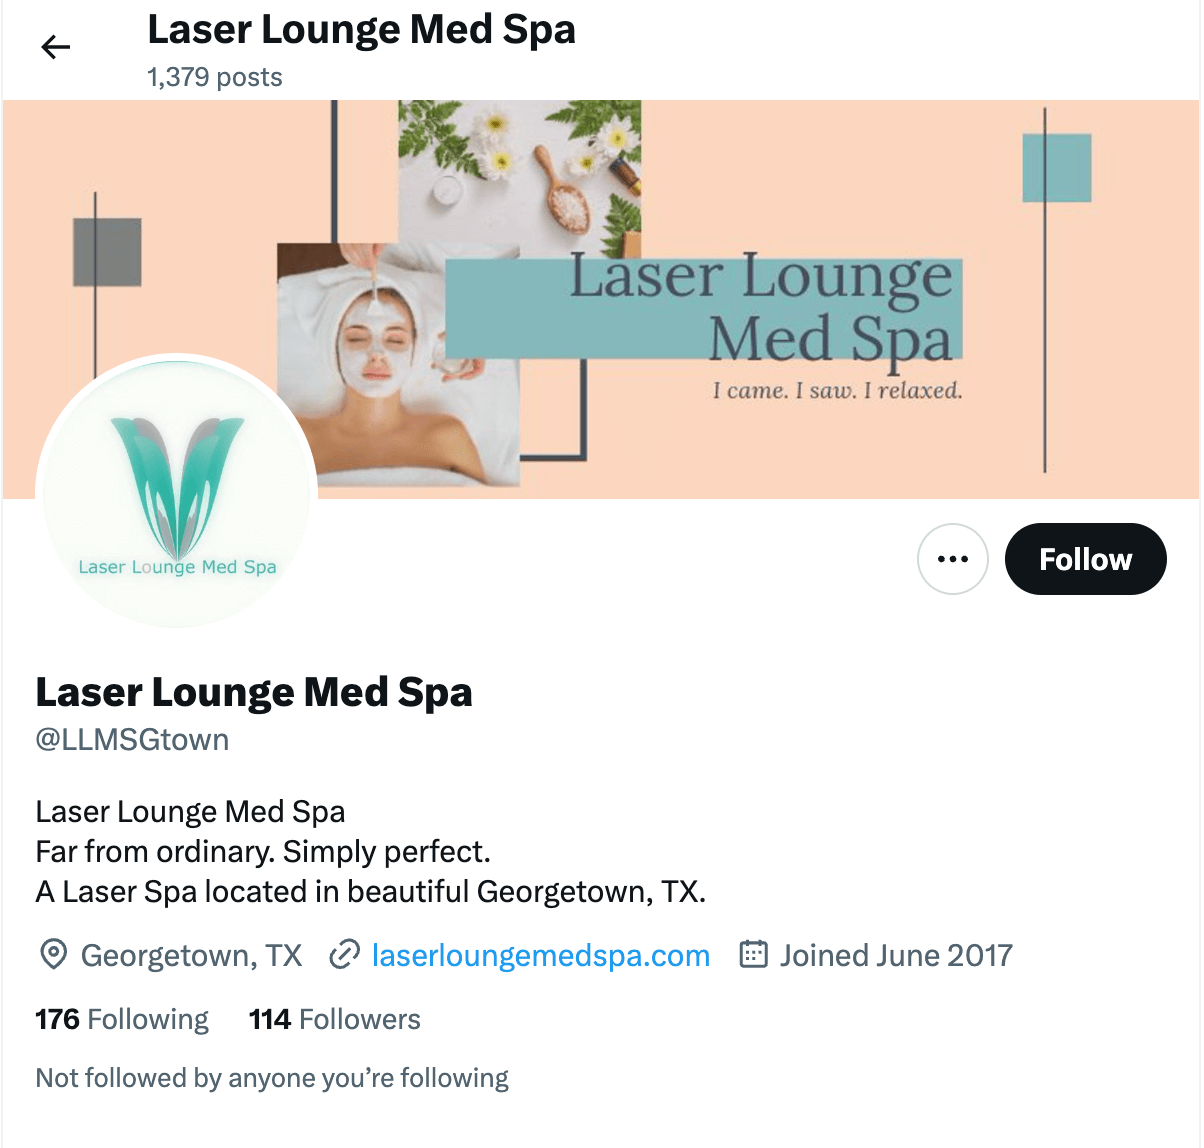 Image of the Laser Lounge Med Spa X feed along with peach banner and images of woman relaxing having a facial